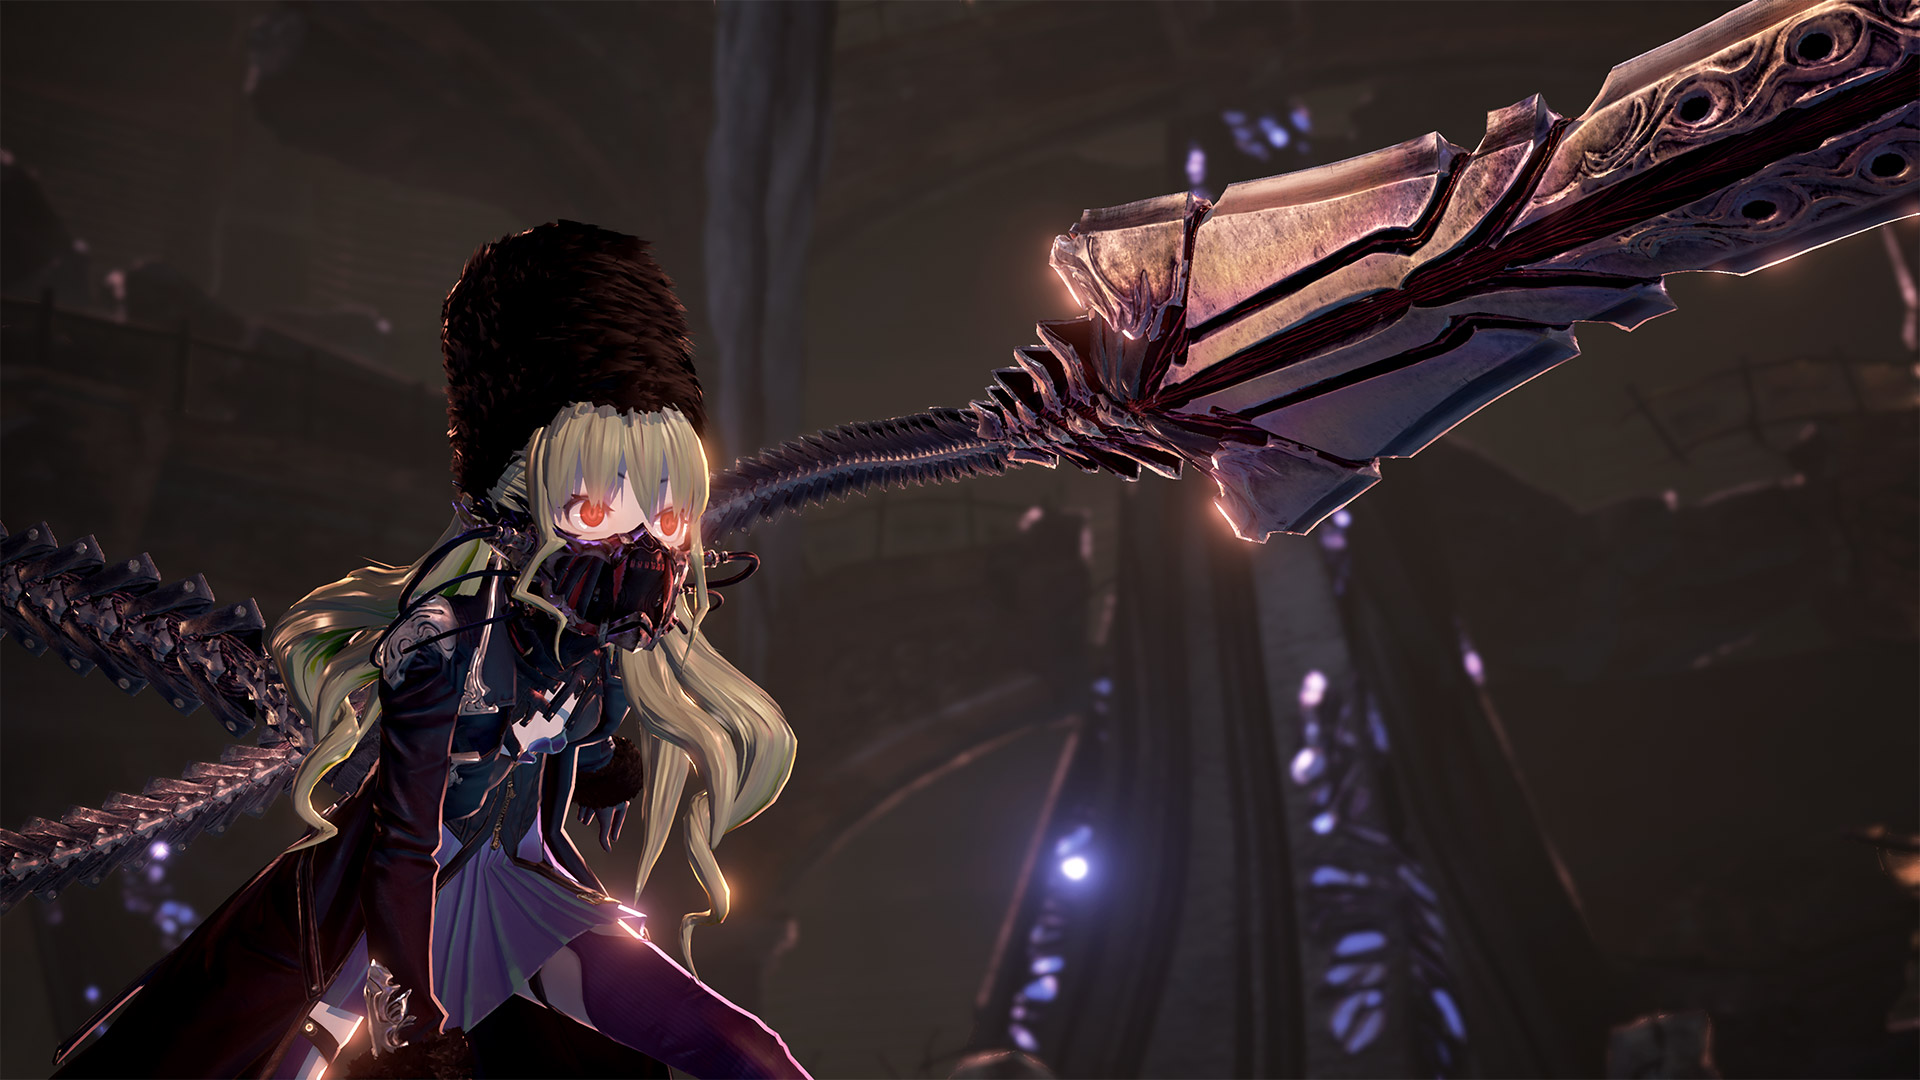 Latest Code Vein Screenshots Show Off New Characters And Weapons - GameSpot